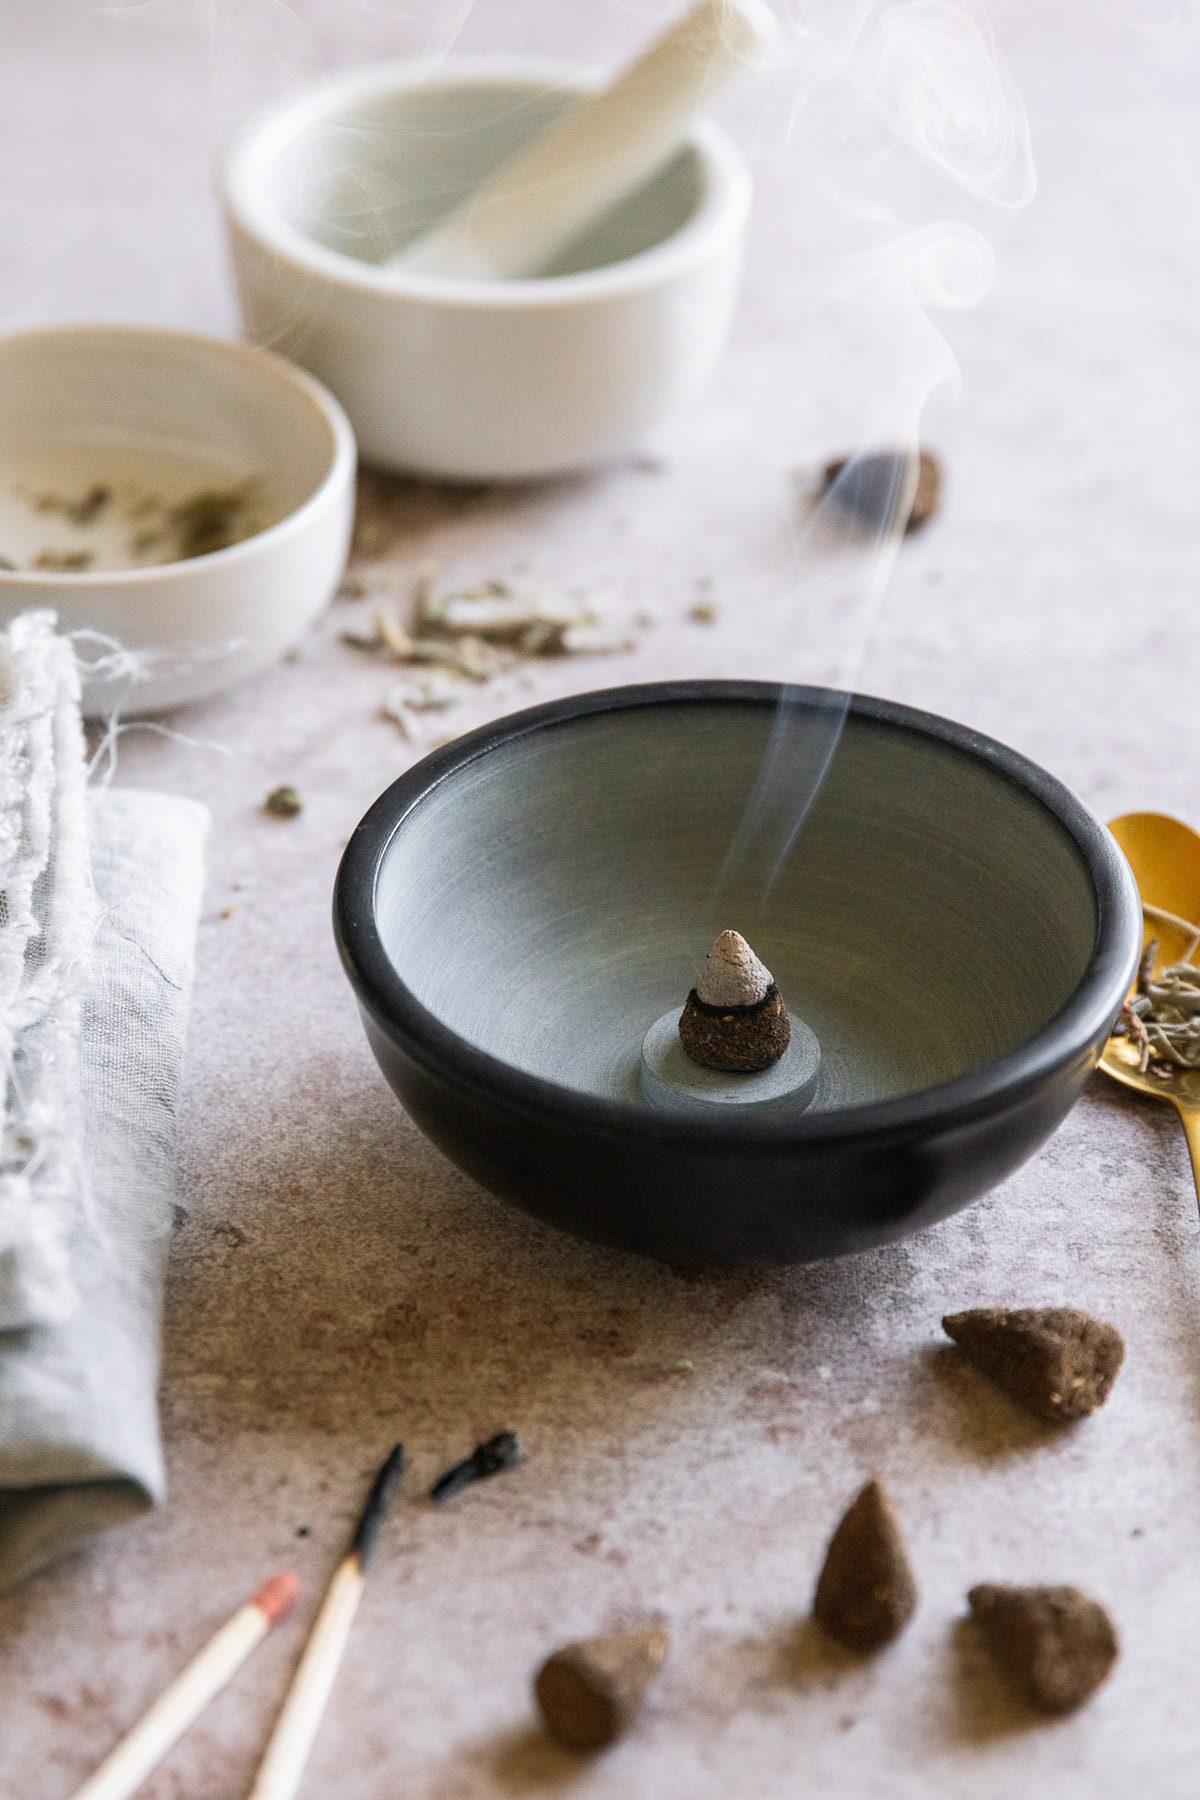 How to use incense around the house